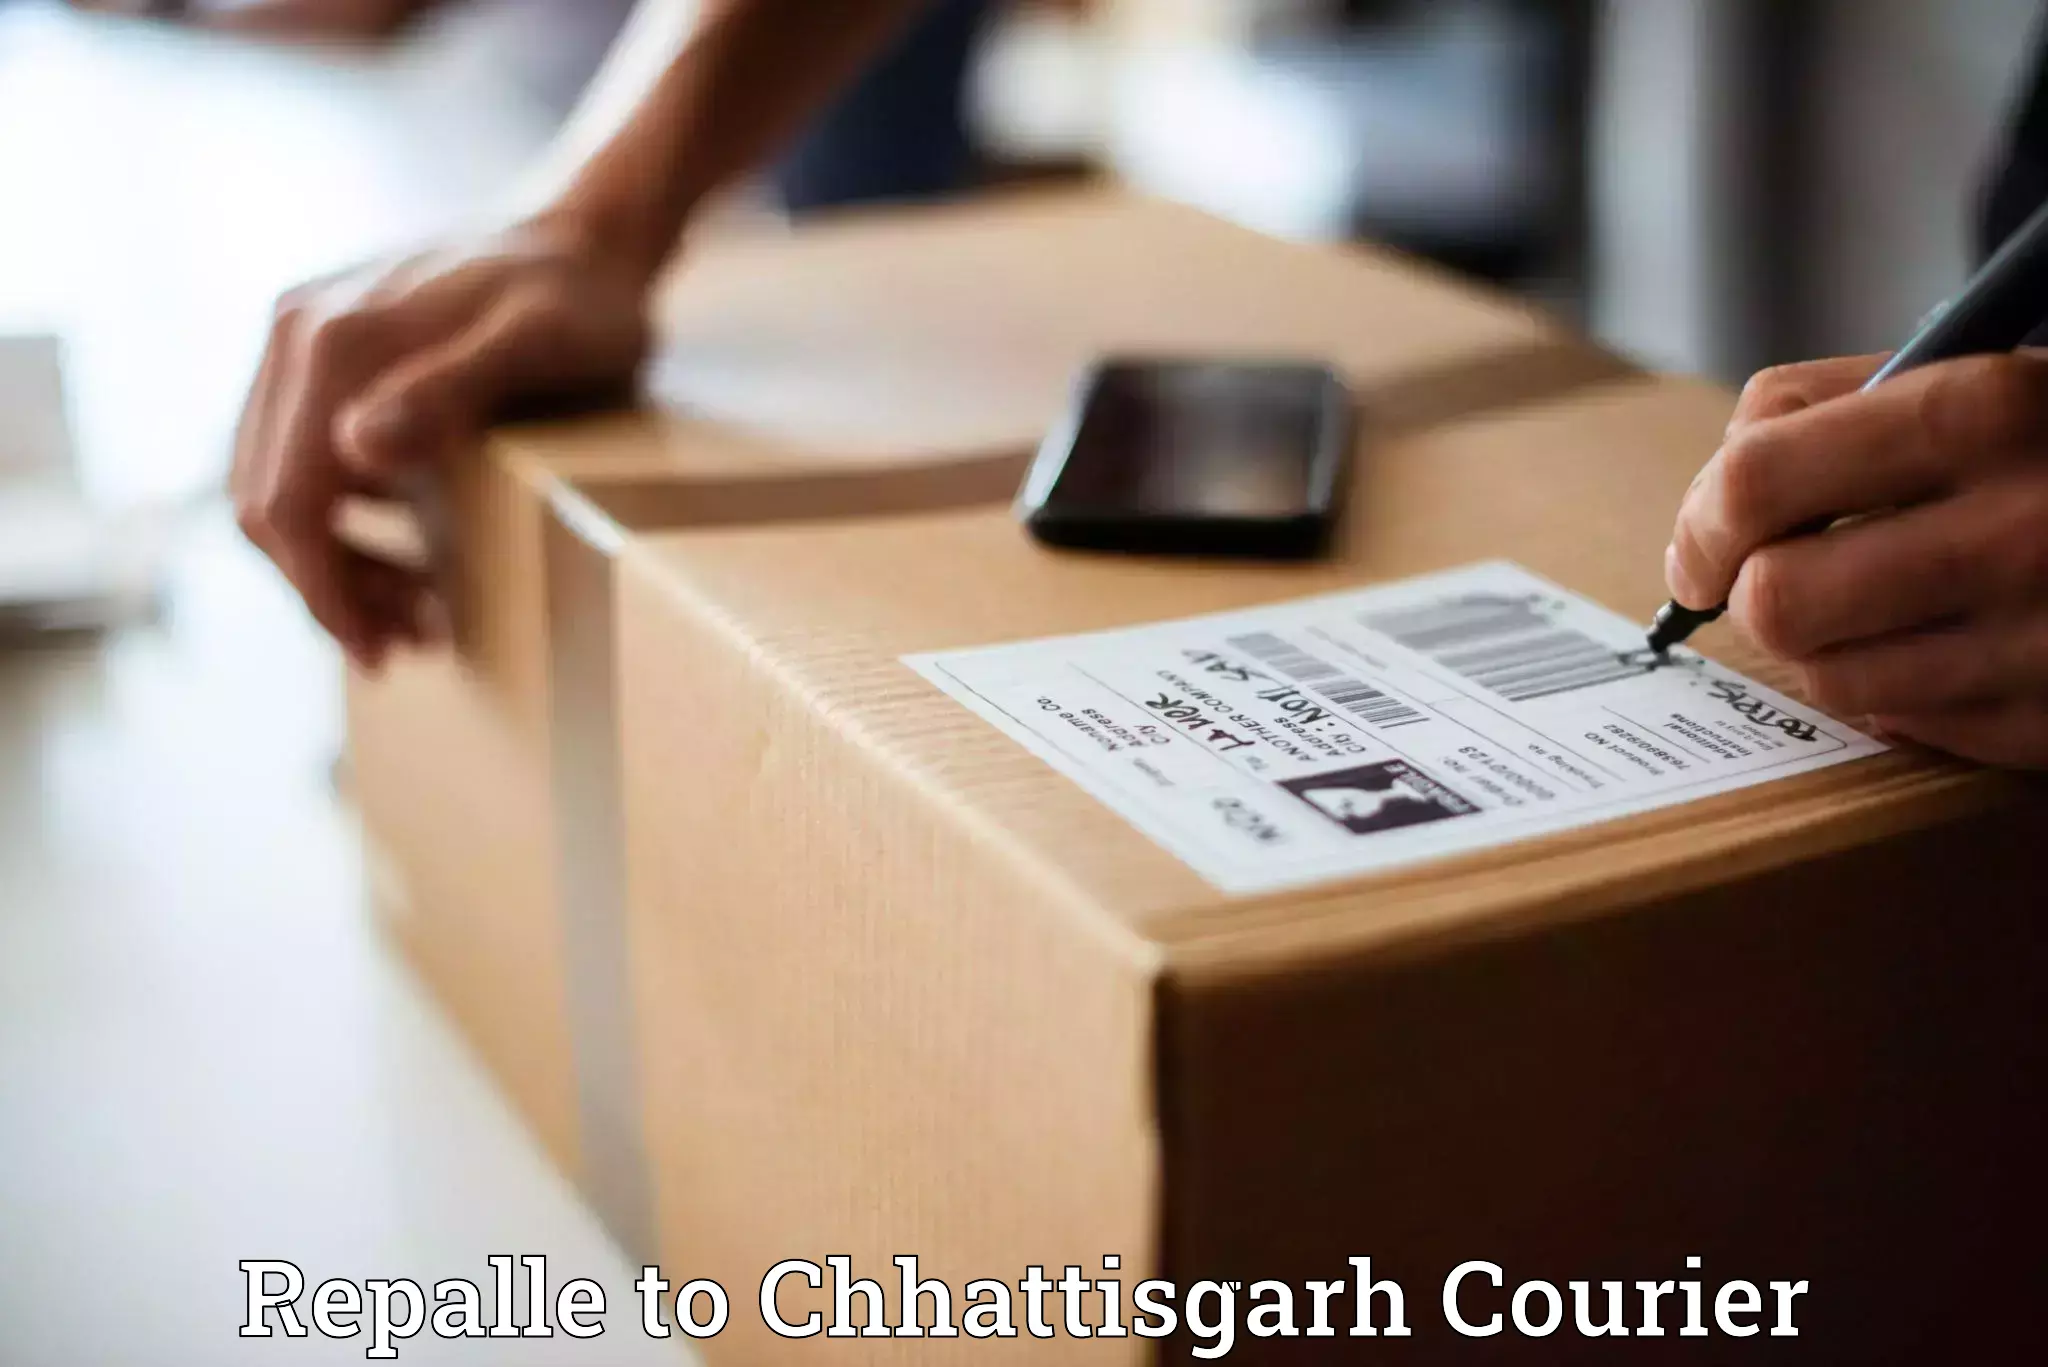 Expedited parcel delivery Repalle to Nagri